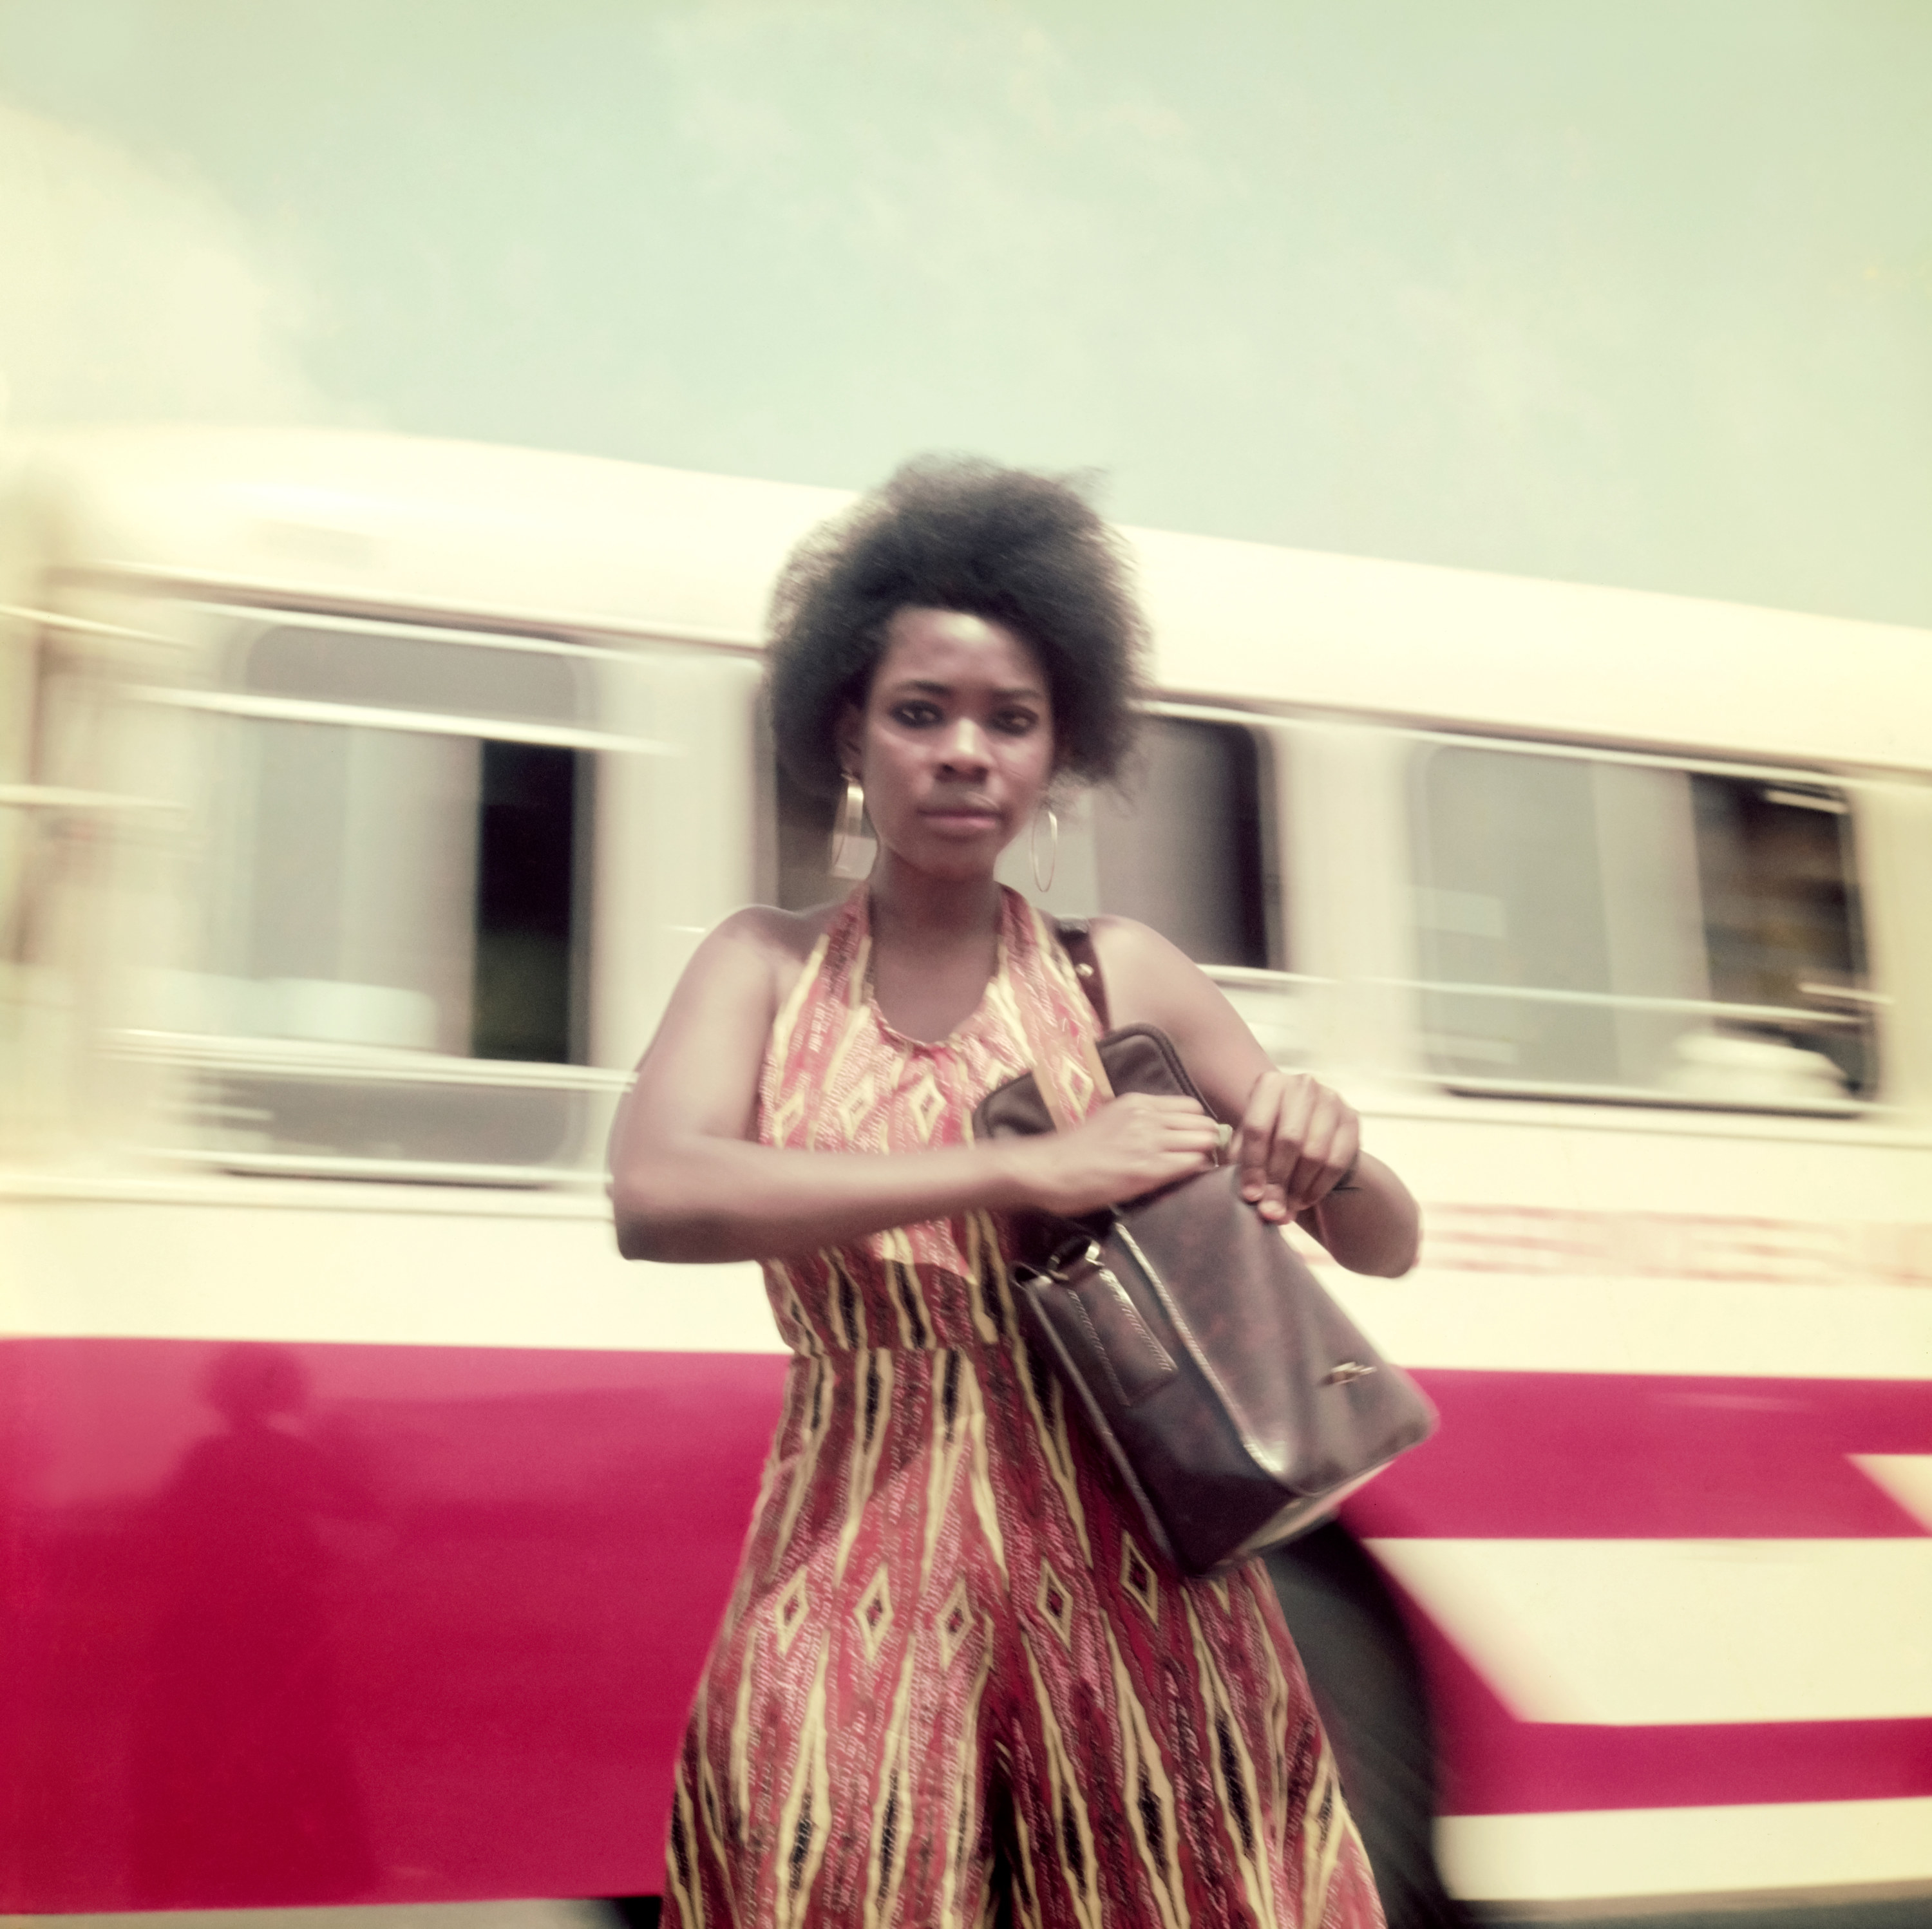 A woman in a dress and purse in front of a moving bus